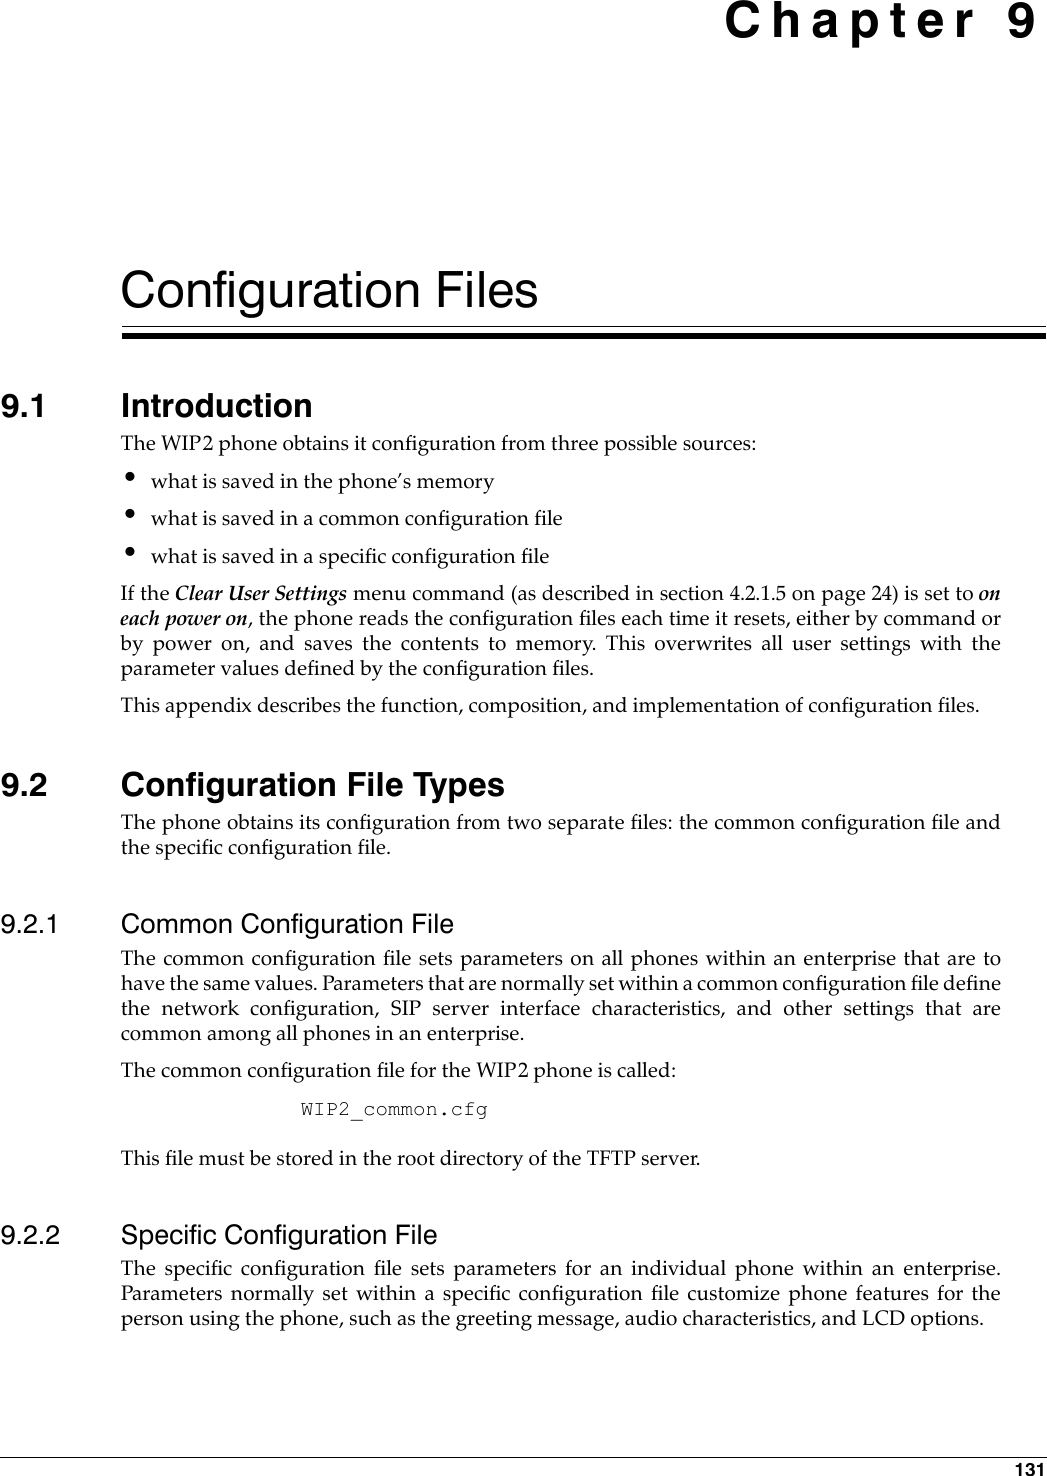 131 Chapter 9Configuration Files9.1 IntroductionThe WIP2 phone obtains it configuration from three possible sources:•what is saved in the phone’s memory•what is saved in a common configuration file•what is saved in a specific configuration fileIf the Clear User Settings menu command (as described in section 4.2.1.5 on page 24) is set to oneach power on, the phone reads the configuration files each time it resets, either by command orby power on, and saves the contents to memory. This overwrites all user settings with theparameter values defined by the configuration files.This appendix describes the function, composition, and implementation of configuration files.9.2 Configuration File TypesThe phone obtains its configuration from two separate files: the common configuration file andthe specific configuration file.9.2.1 Common Configuration FileThe common configuration file sets parameters on all phones within an enterprise that are tohave the same values. Parameters that are normally set within a common configuration file definethe network configuration, SIP server interface characteristics, and other settings that arecommon among all phones in an enterprise. The common configuration file for the WIP2 phone is called: WIP2_common.cfgThis file must be stored in the root directory of the TFTP server.9.2.2 Specific Configuration FileThe specific configuration file sets parameters for an individual phone within an enterprise.Parameters normally set within a specific configuration file customize phone features for theperson using the phone, such as the greeting message, audio characteristics, and LCD options.